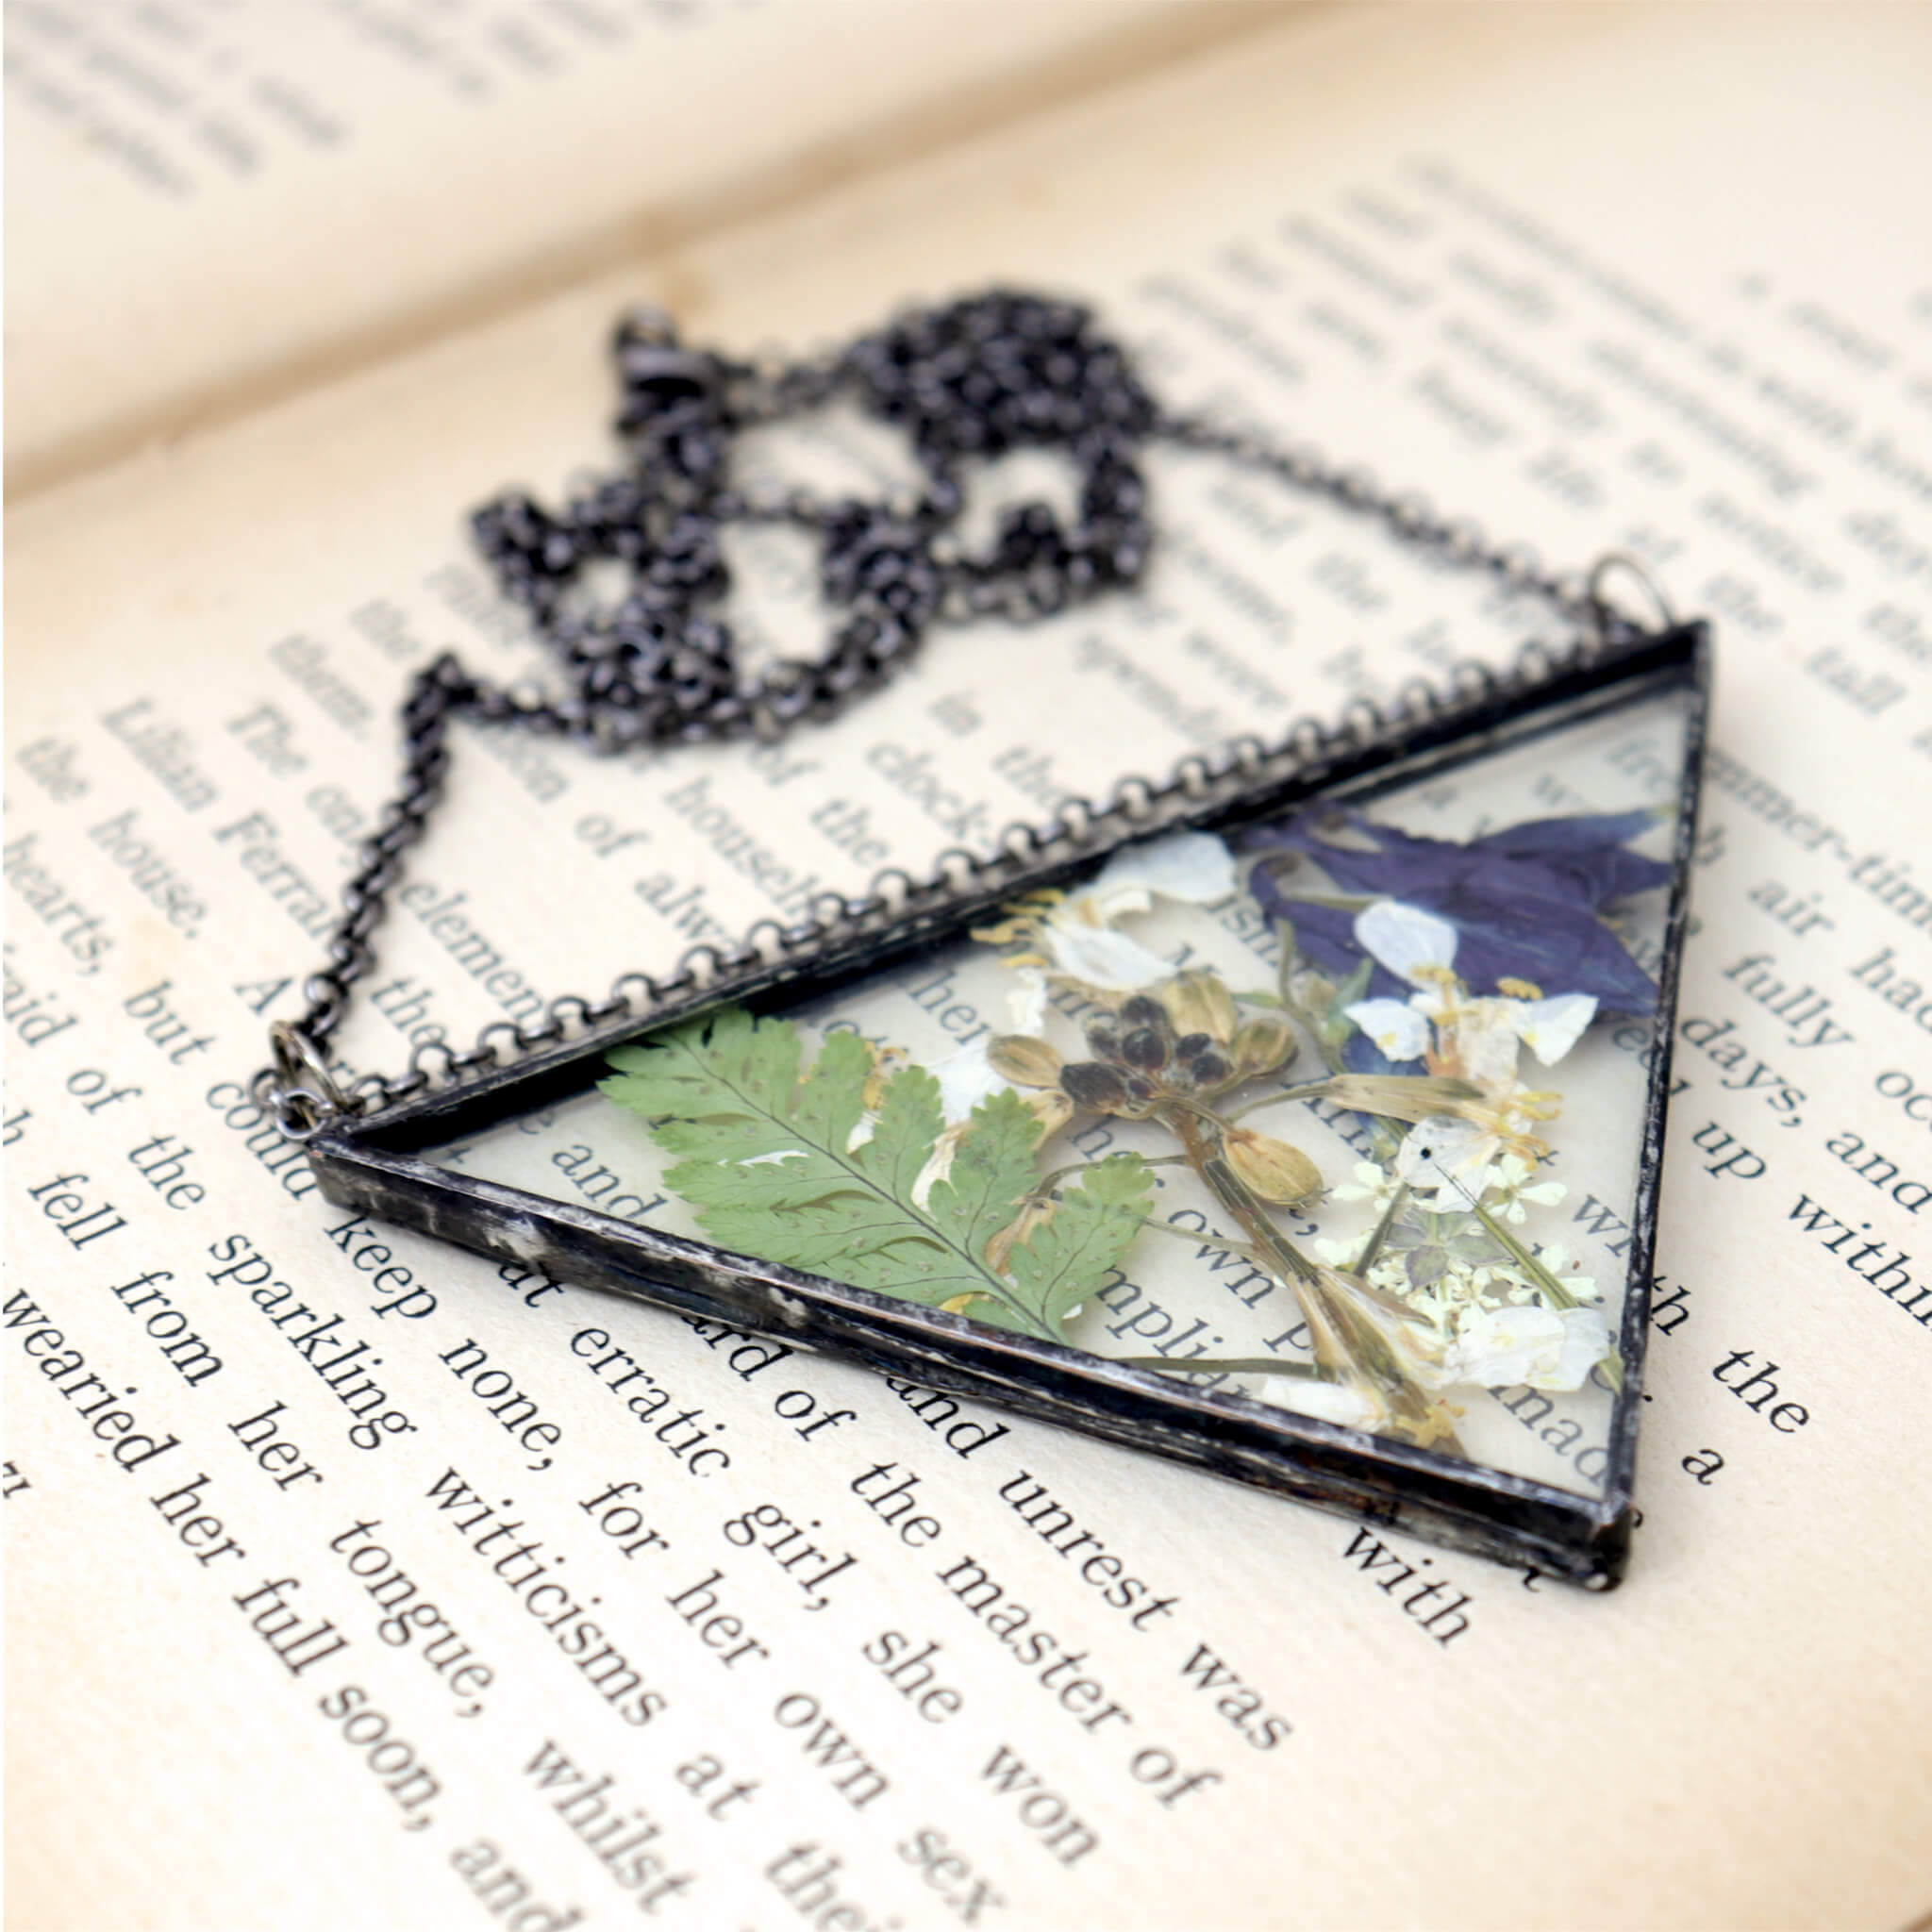 Necklace of a mix of pressed flowers in triangular soldered glass lying on an old book